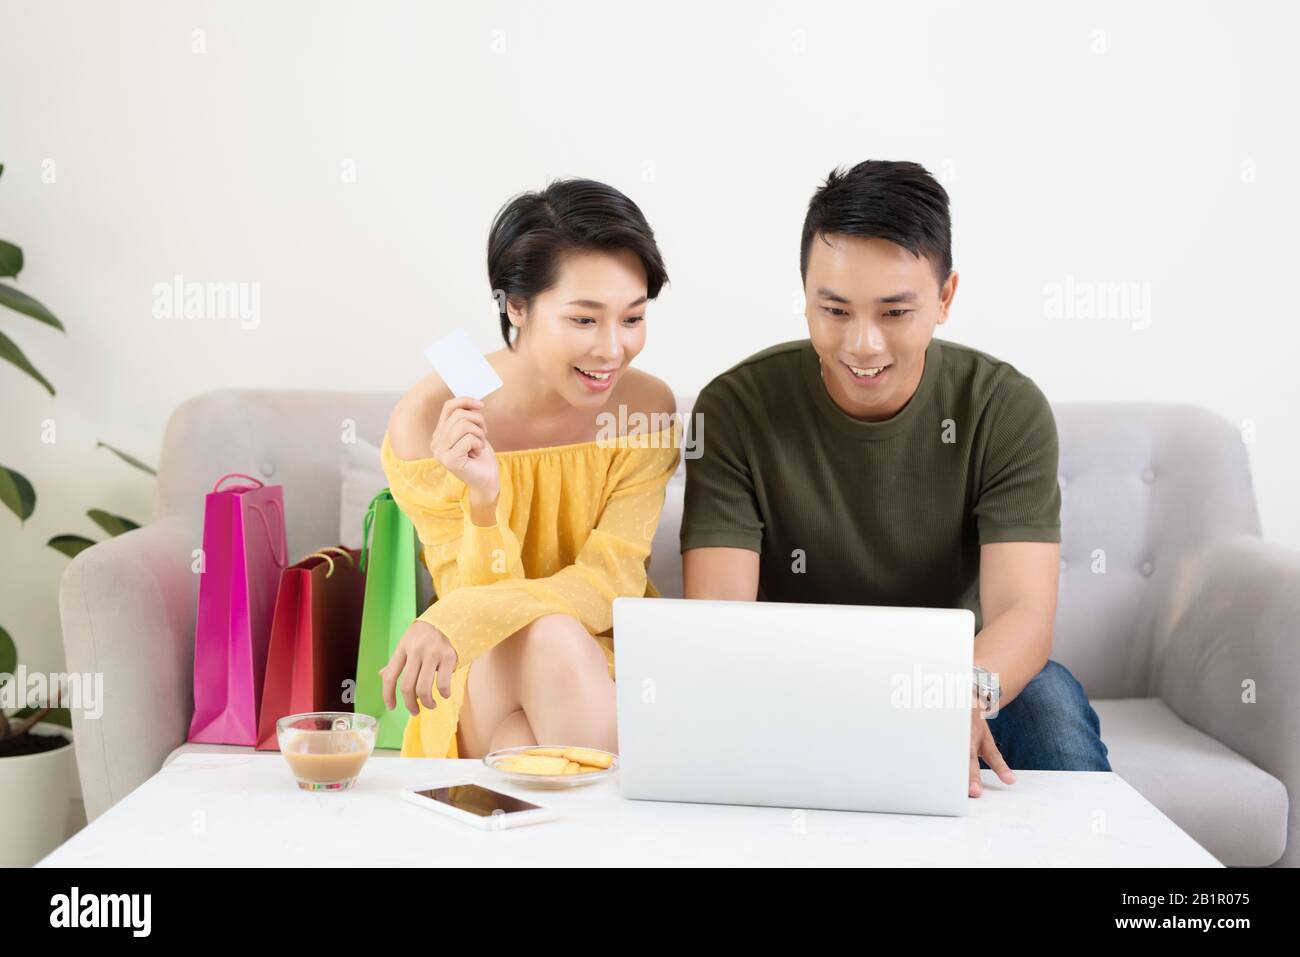 Young Asian Couple Making Online Purchases On Laptop At Home Stock Photo